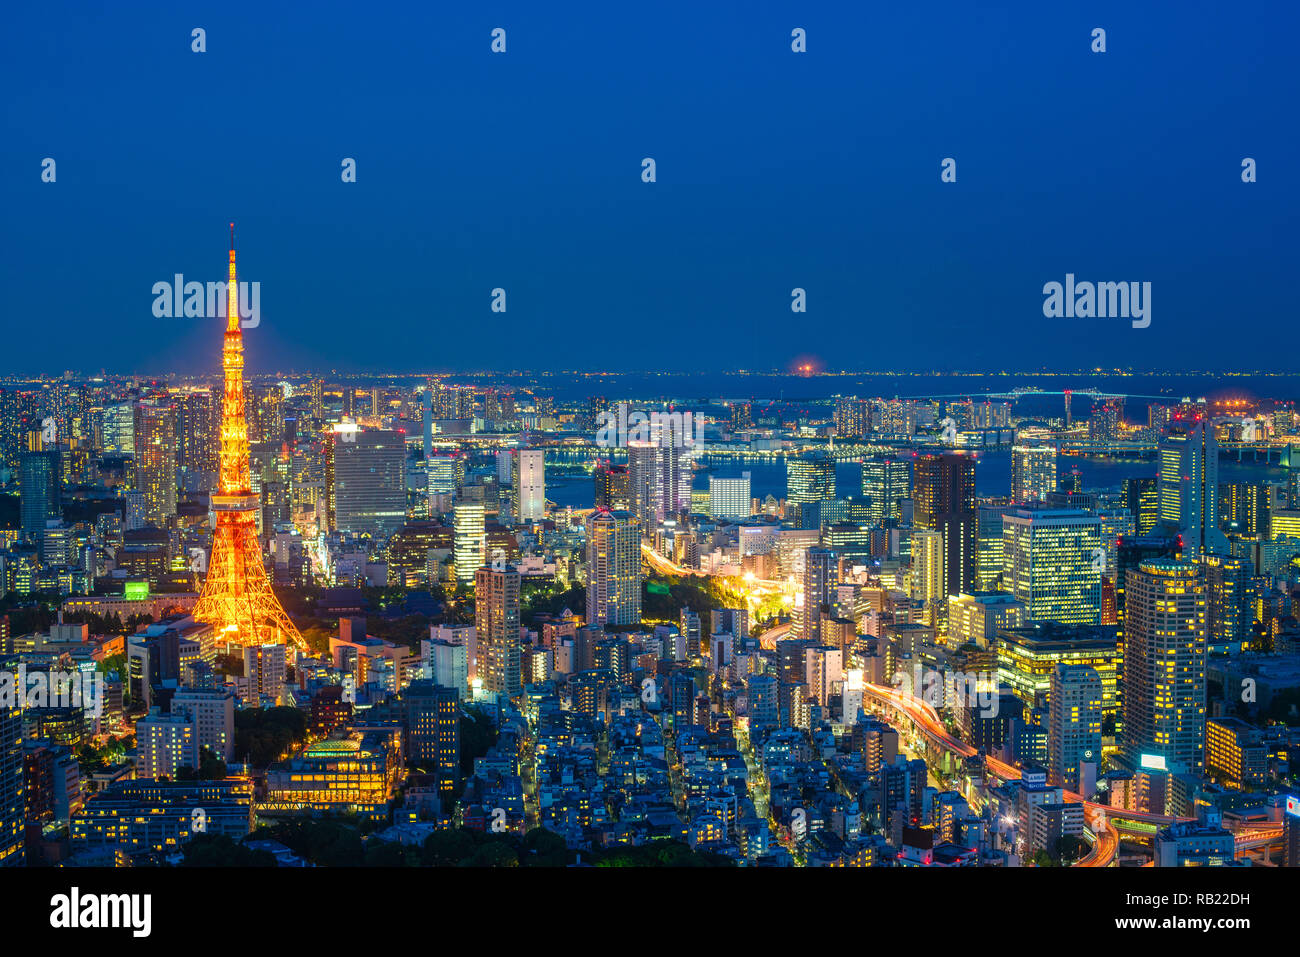 Tokyo tower night time, wide angle view, Japan. Stock Photo